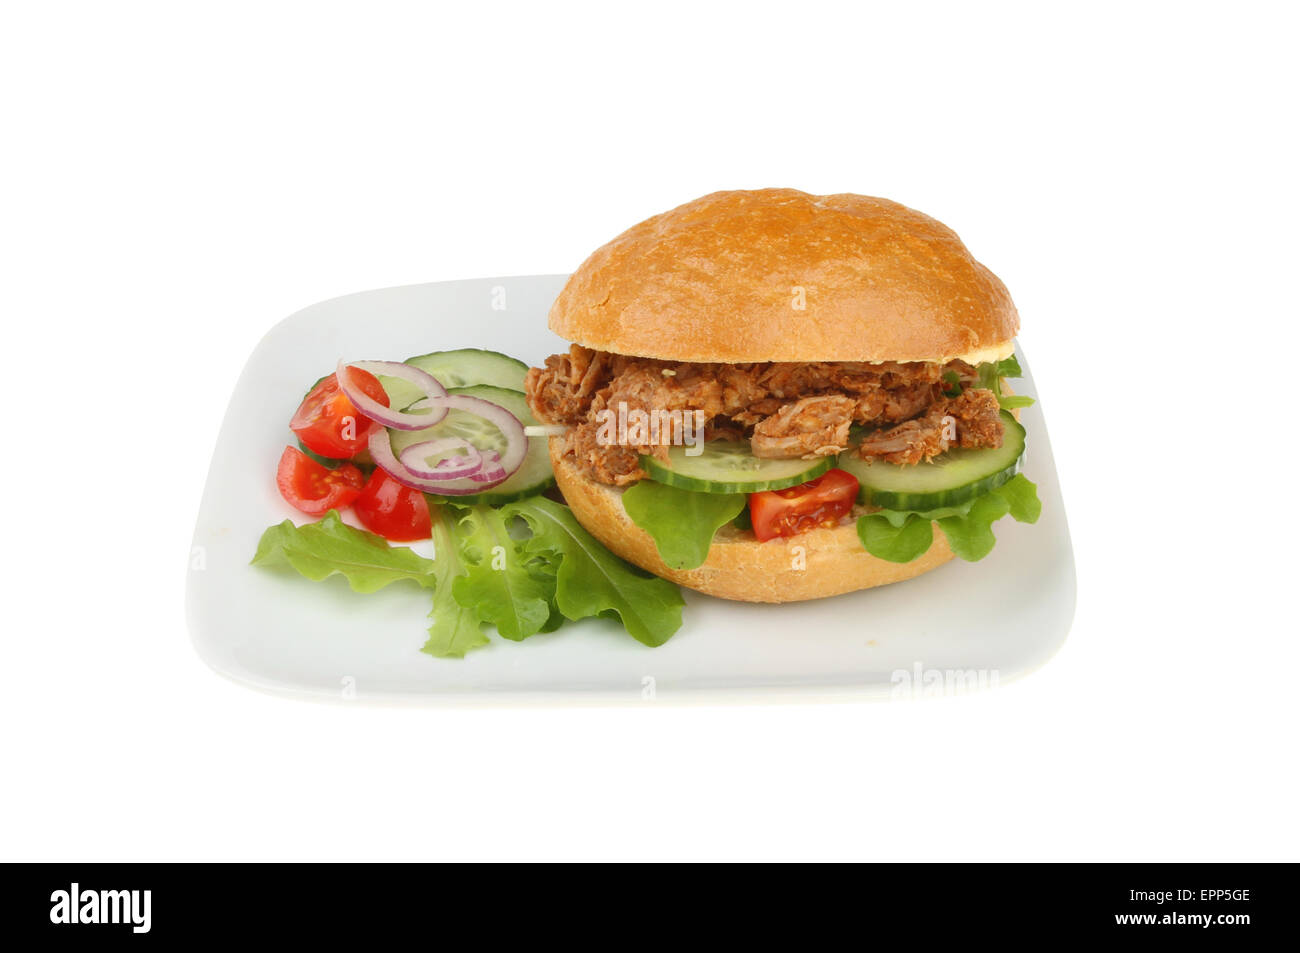 Bread roll filled with pulled pork, salad with a salad garnish on a plate isolated against white Stock Photo